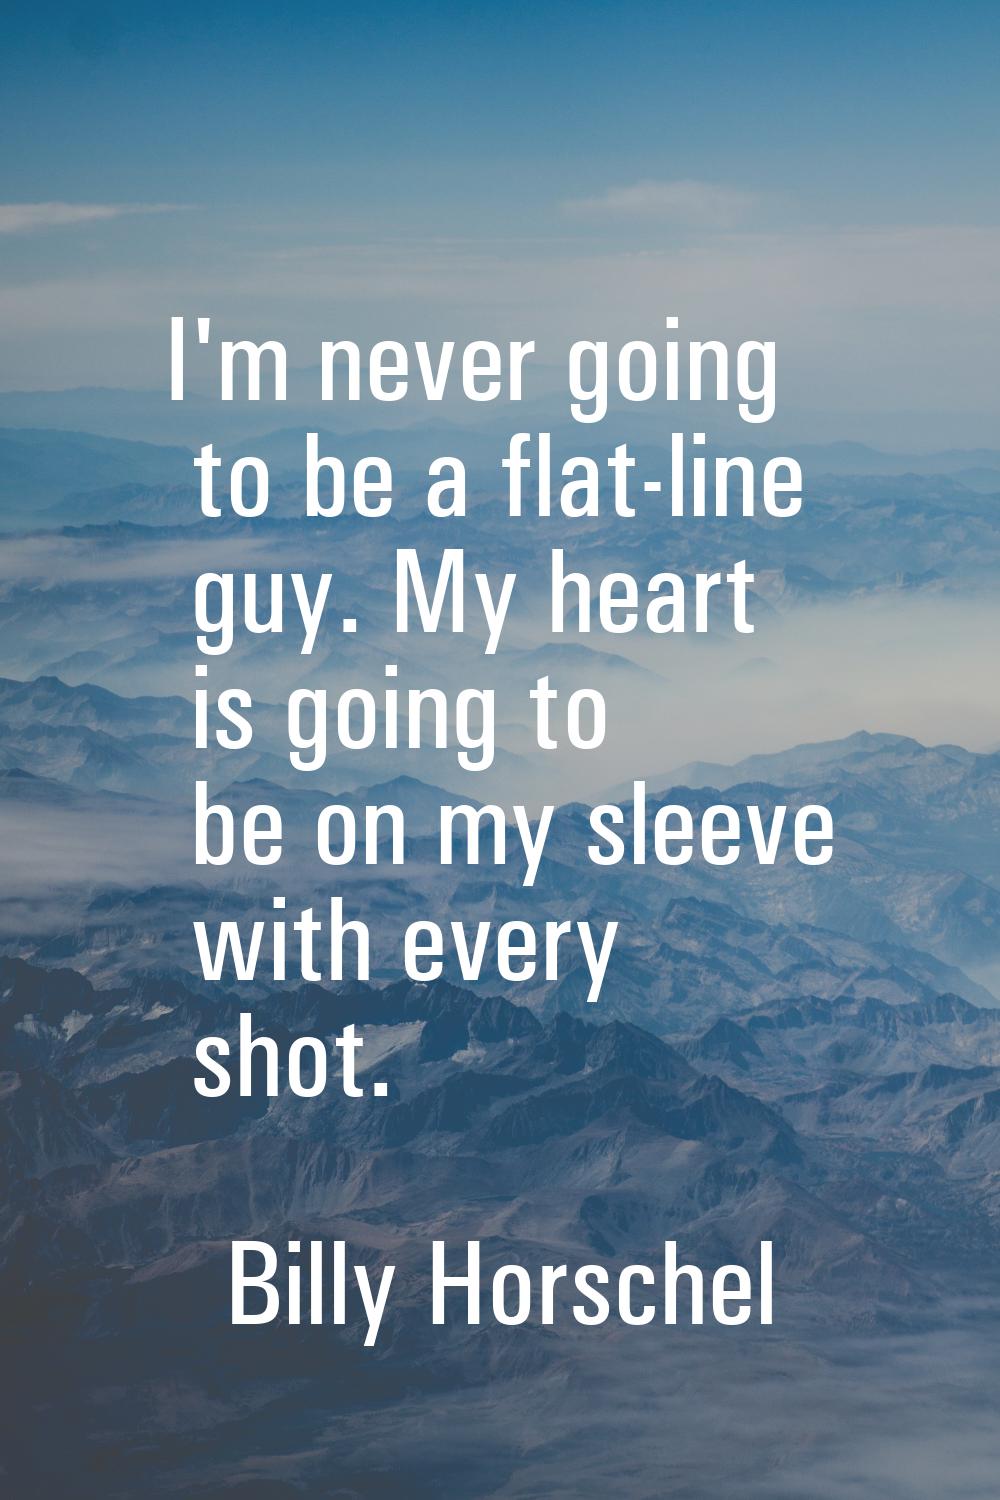 I'm never going to be a flat-line guy. My heart is going to be on my sleeve with every shot.